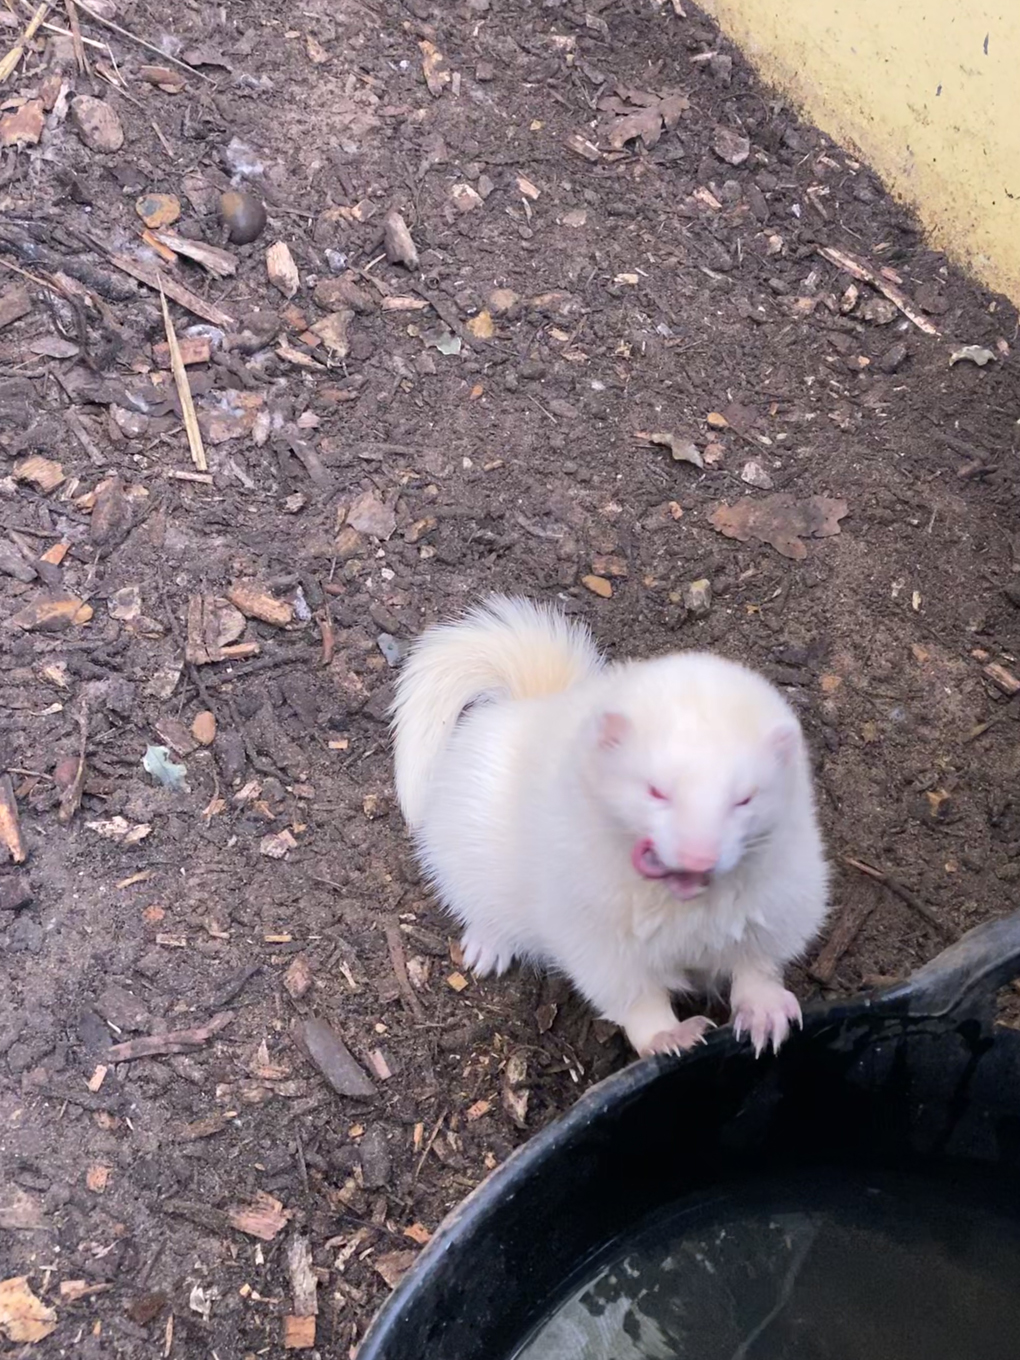 A blurry photo of an albino ferret licking its lips